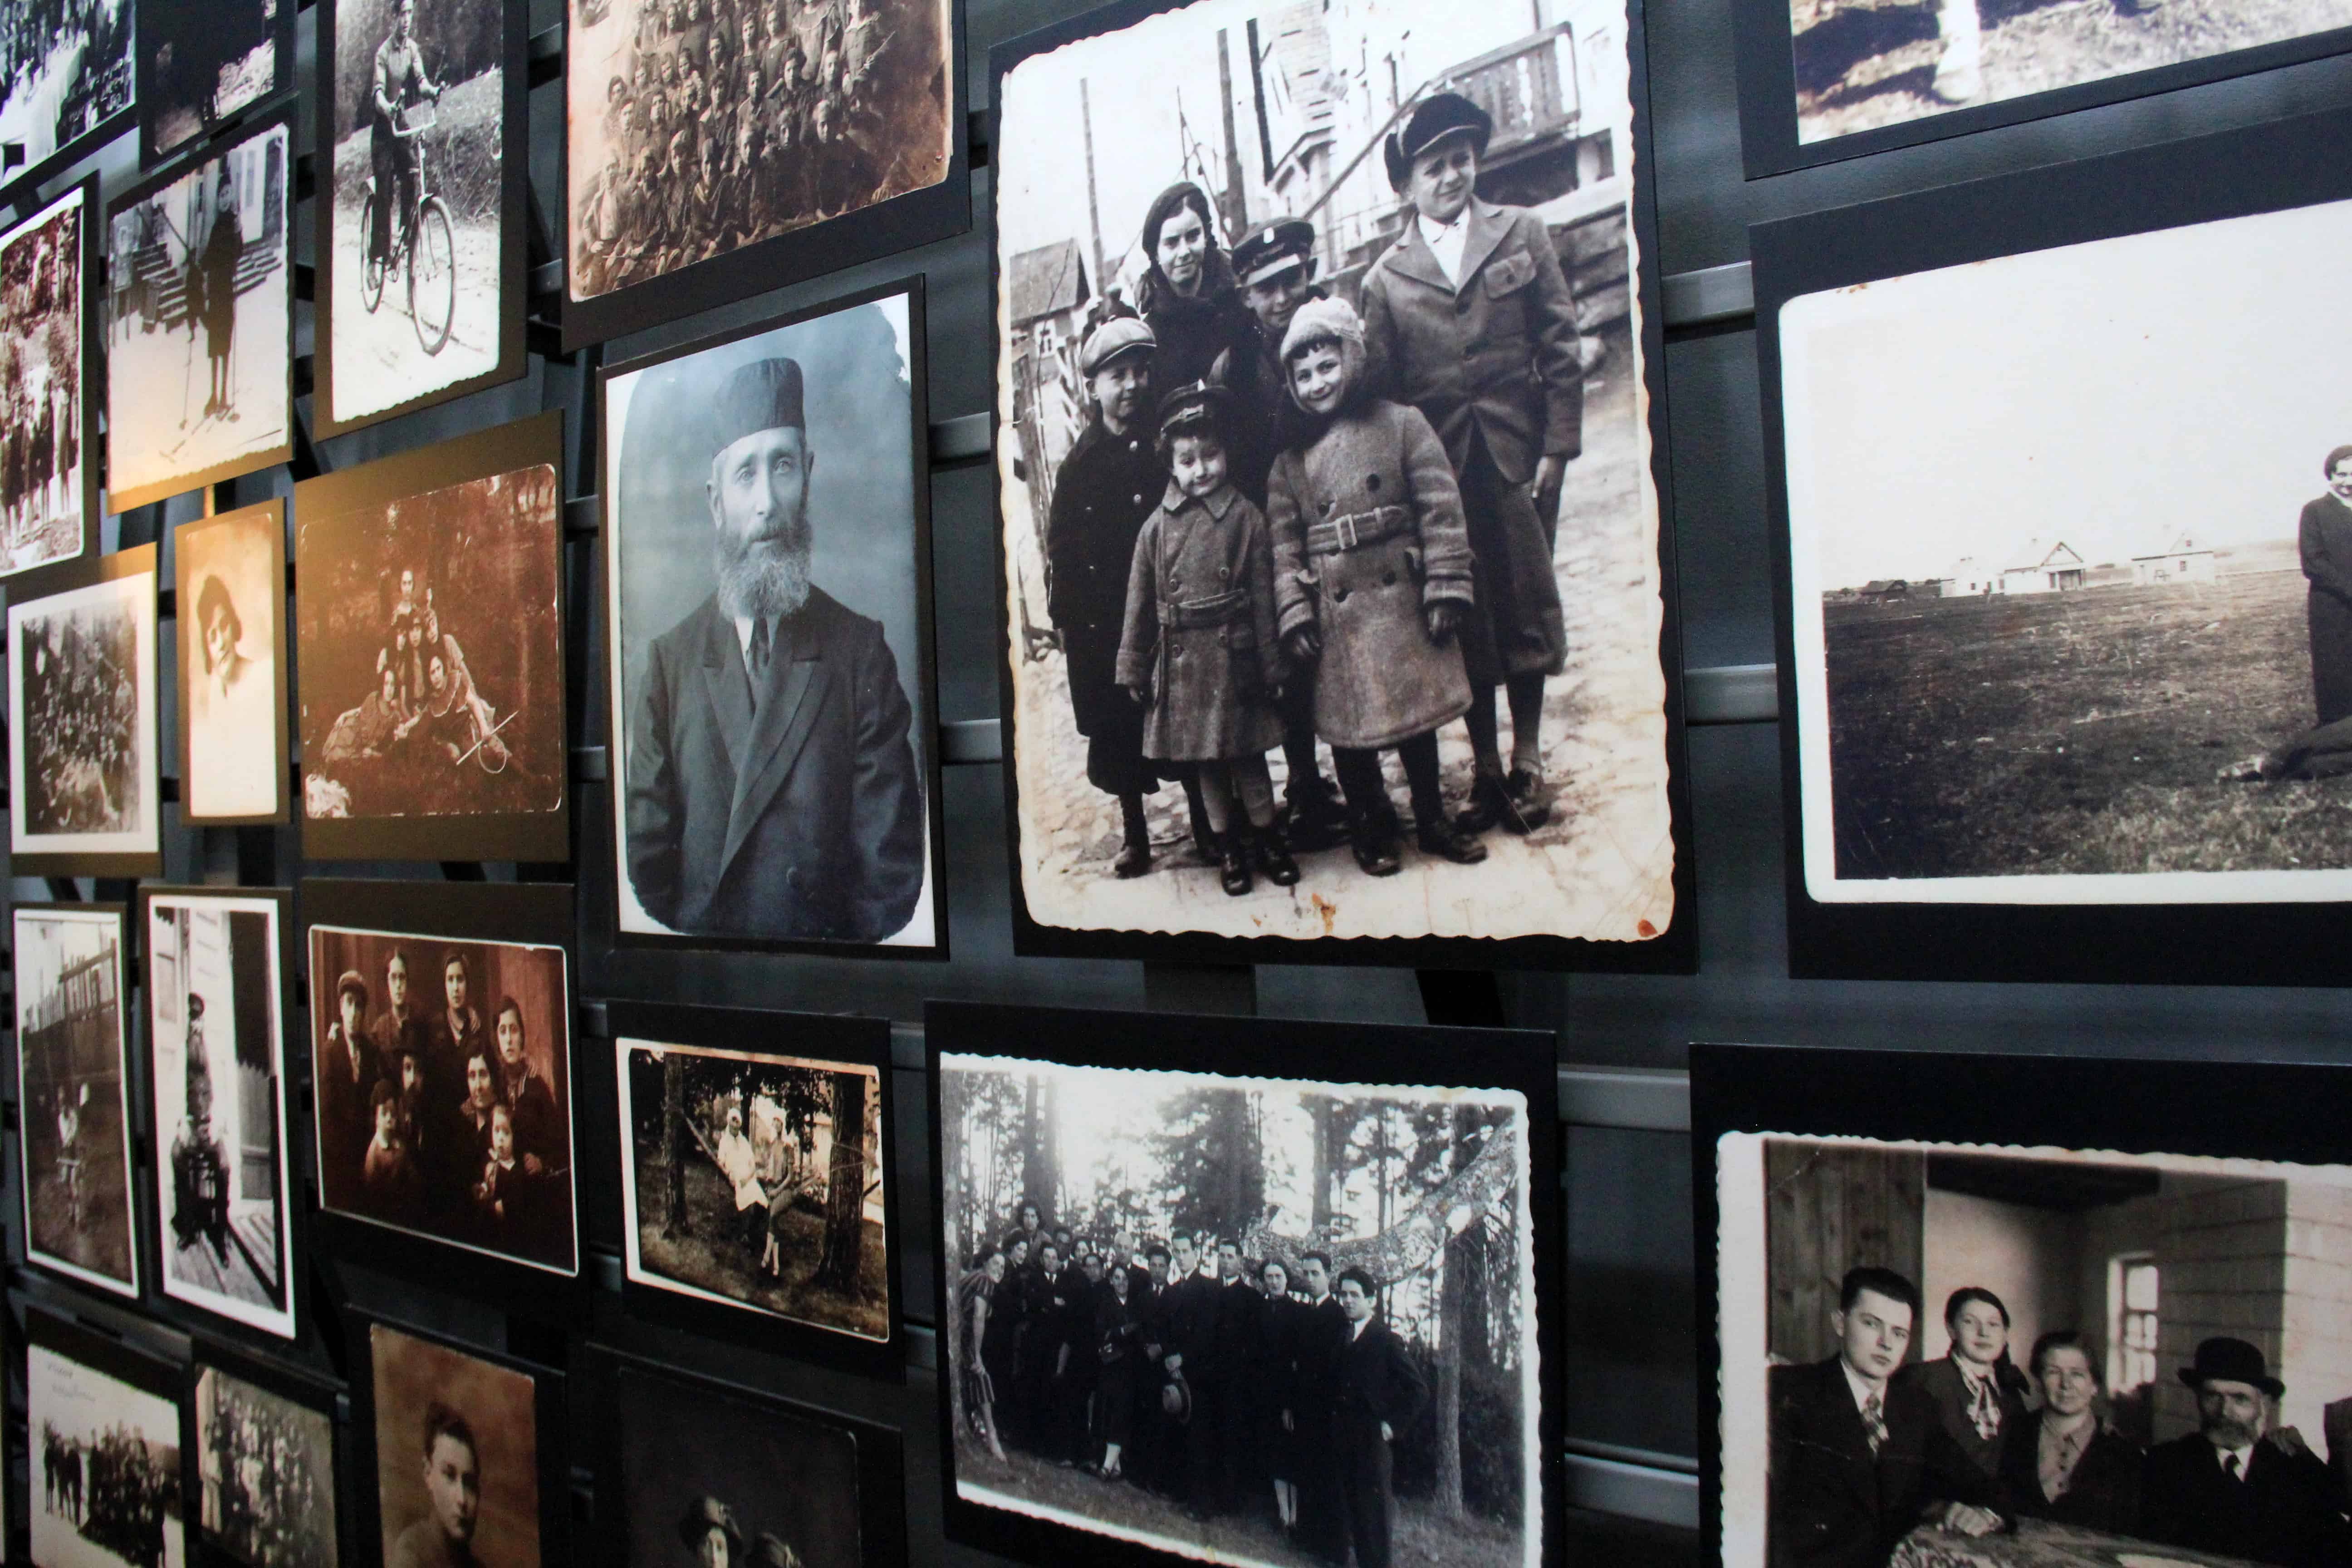 Horák family represented by thousands The United States Holocaust Memorial Museum